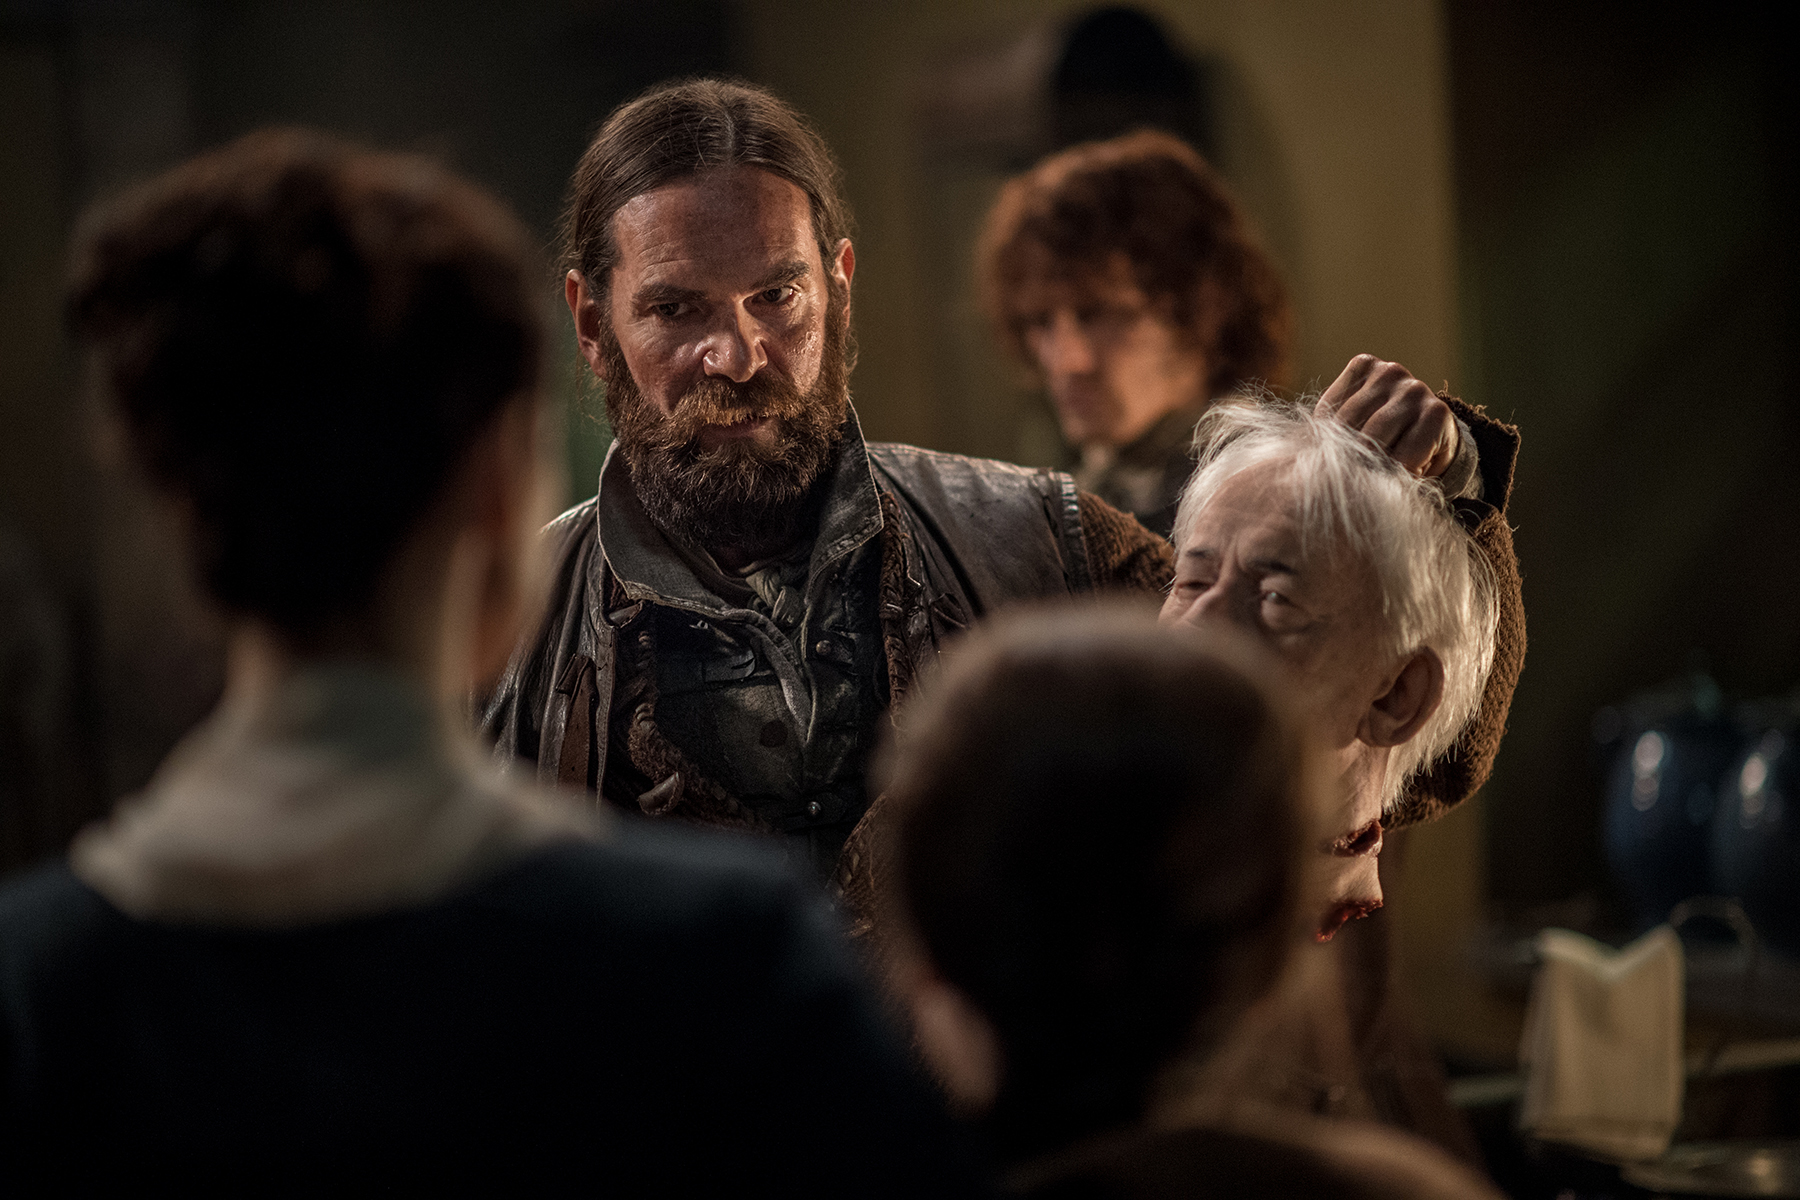 I mean, that is the man's head. Murtagh (Duncan Lacroix) is giving her the man's severed head. And it's awesome.